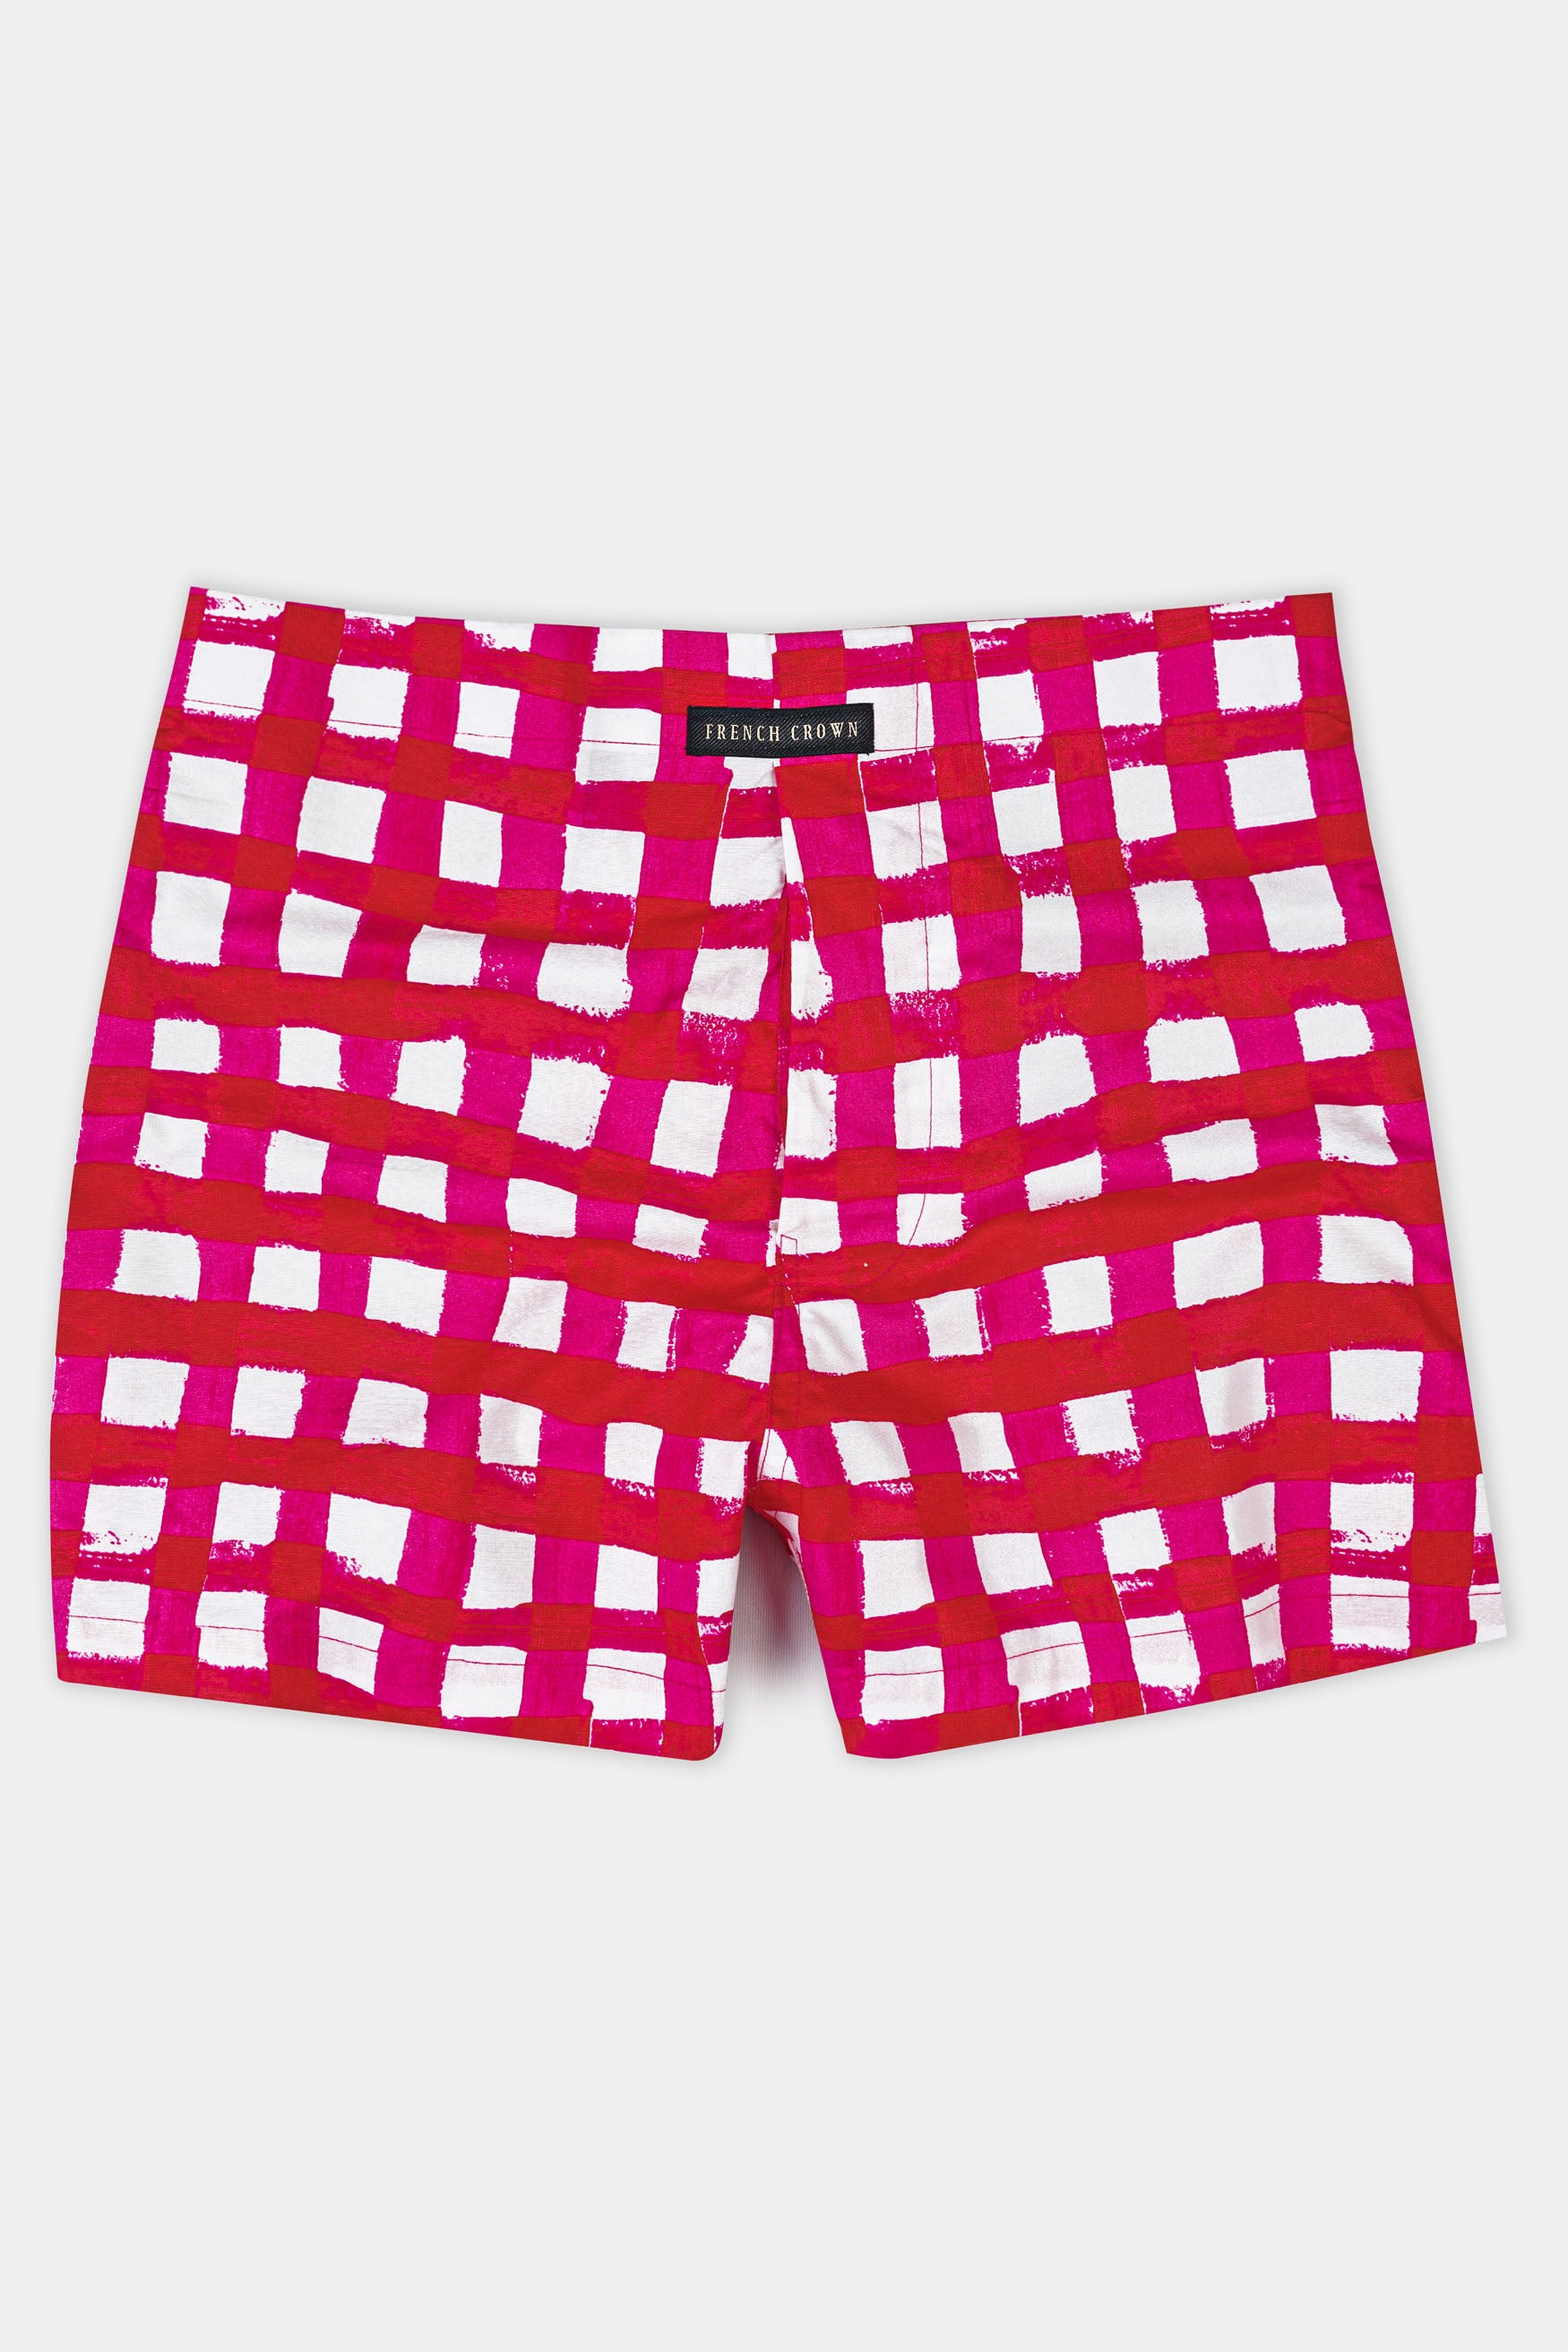 Cardinal Red and White Checked Premium Cotton Boxer